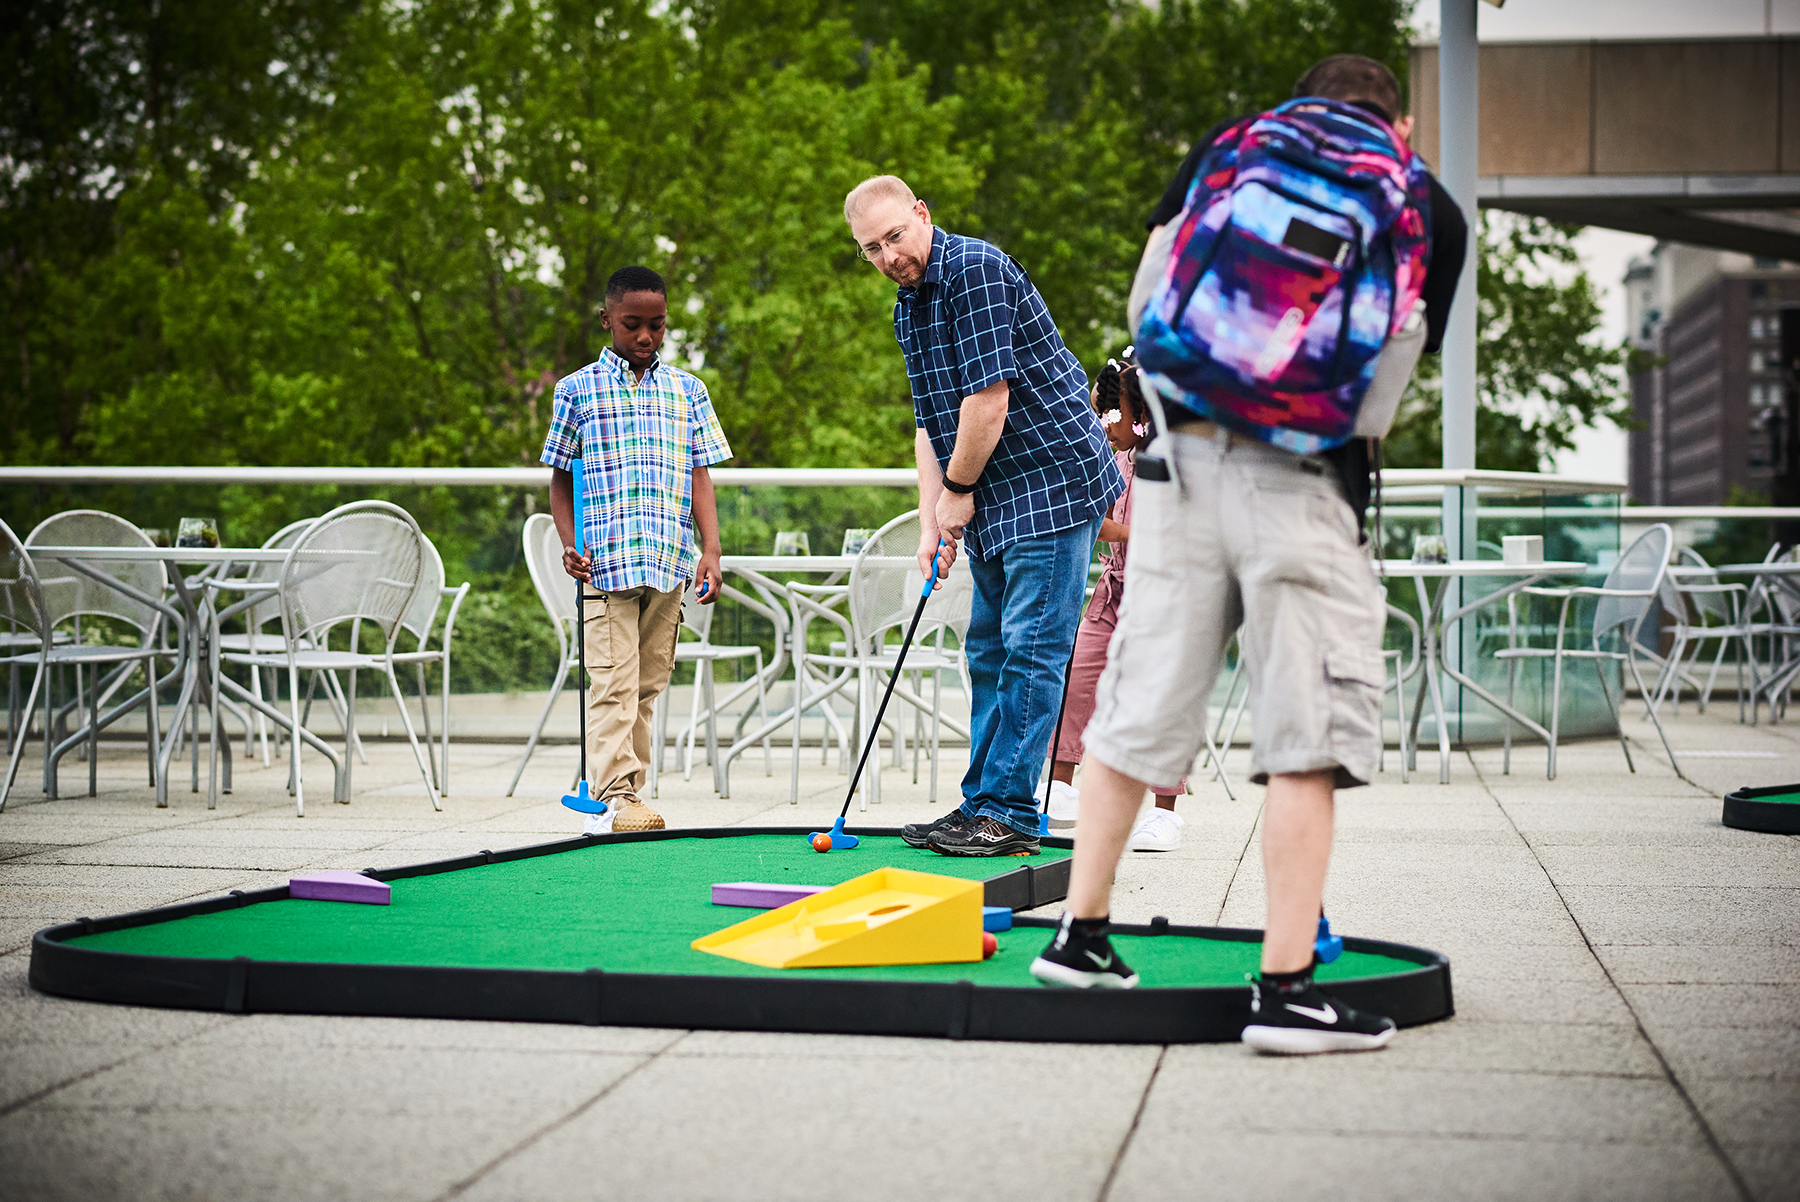 Players putting around the obstacles on an AGS MiniLinks™ Jr. golf hole at a GWU event in Philadelphia, PA